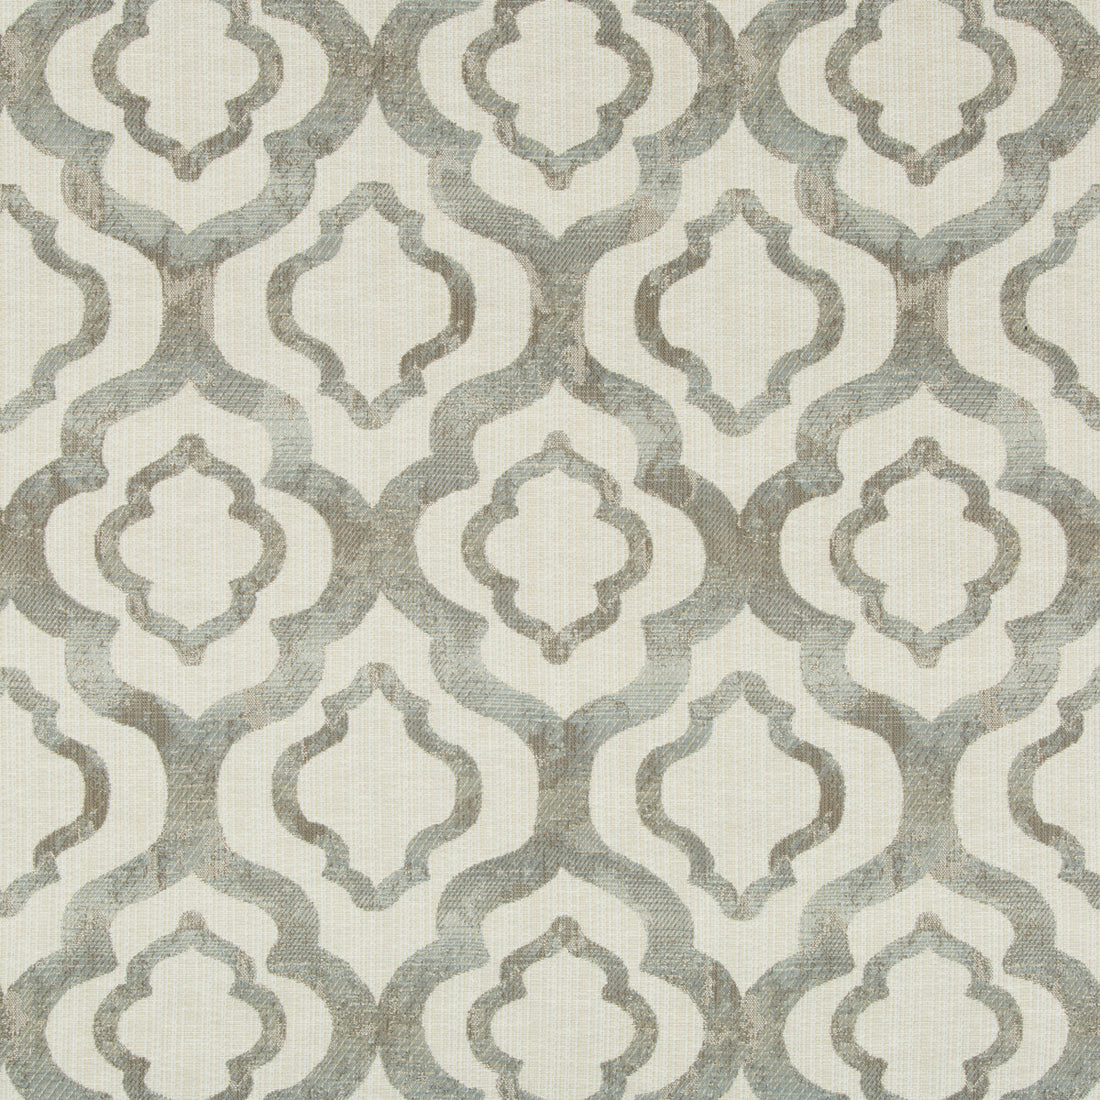 Kravet Design fabric in 34681-1611 color - pattern 34681.1611.0 - by Kravet Design in the Performance Crypton Home collection